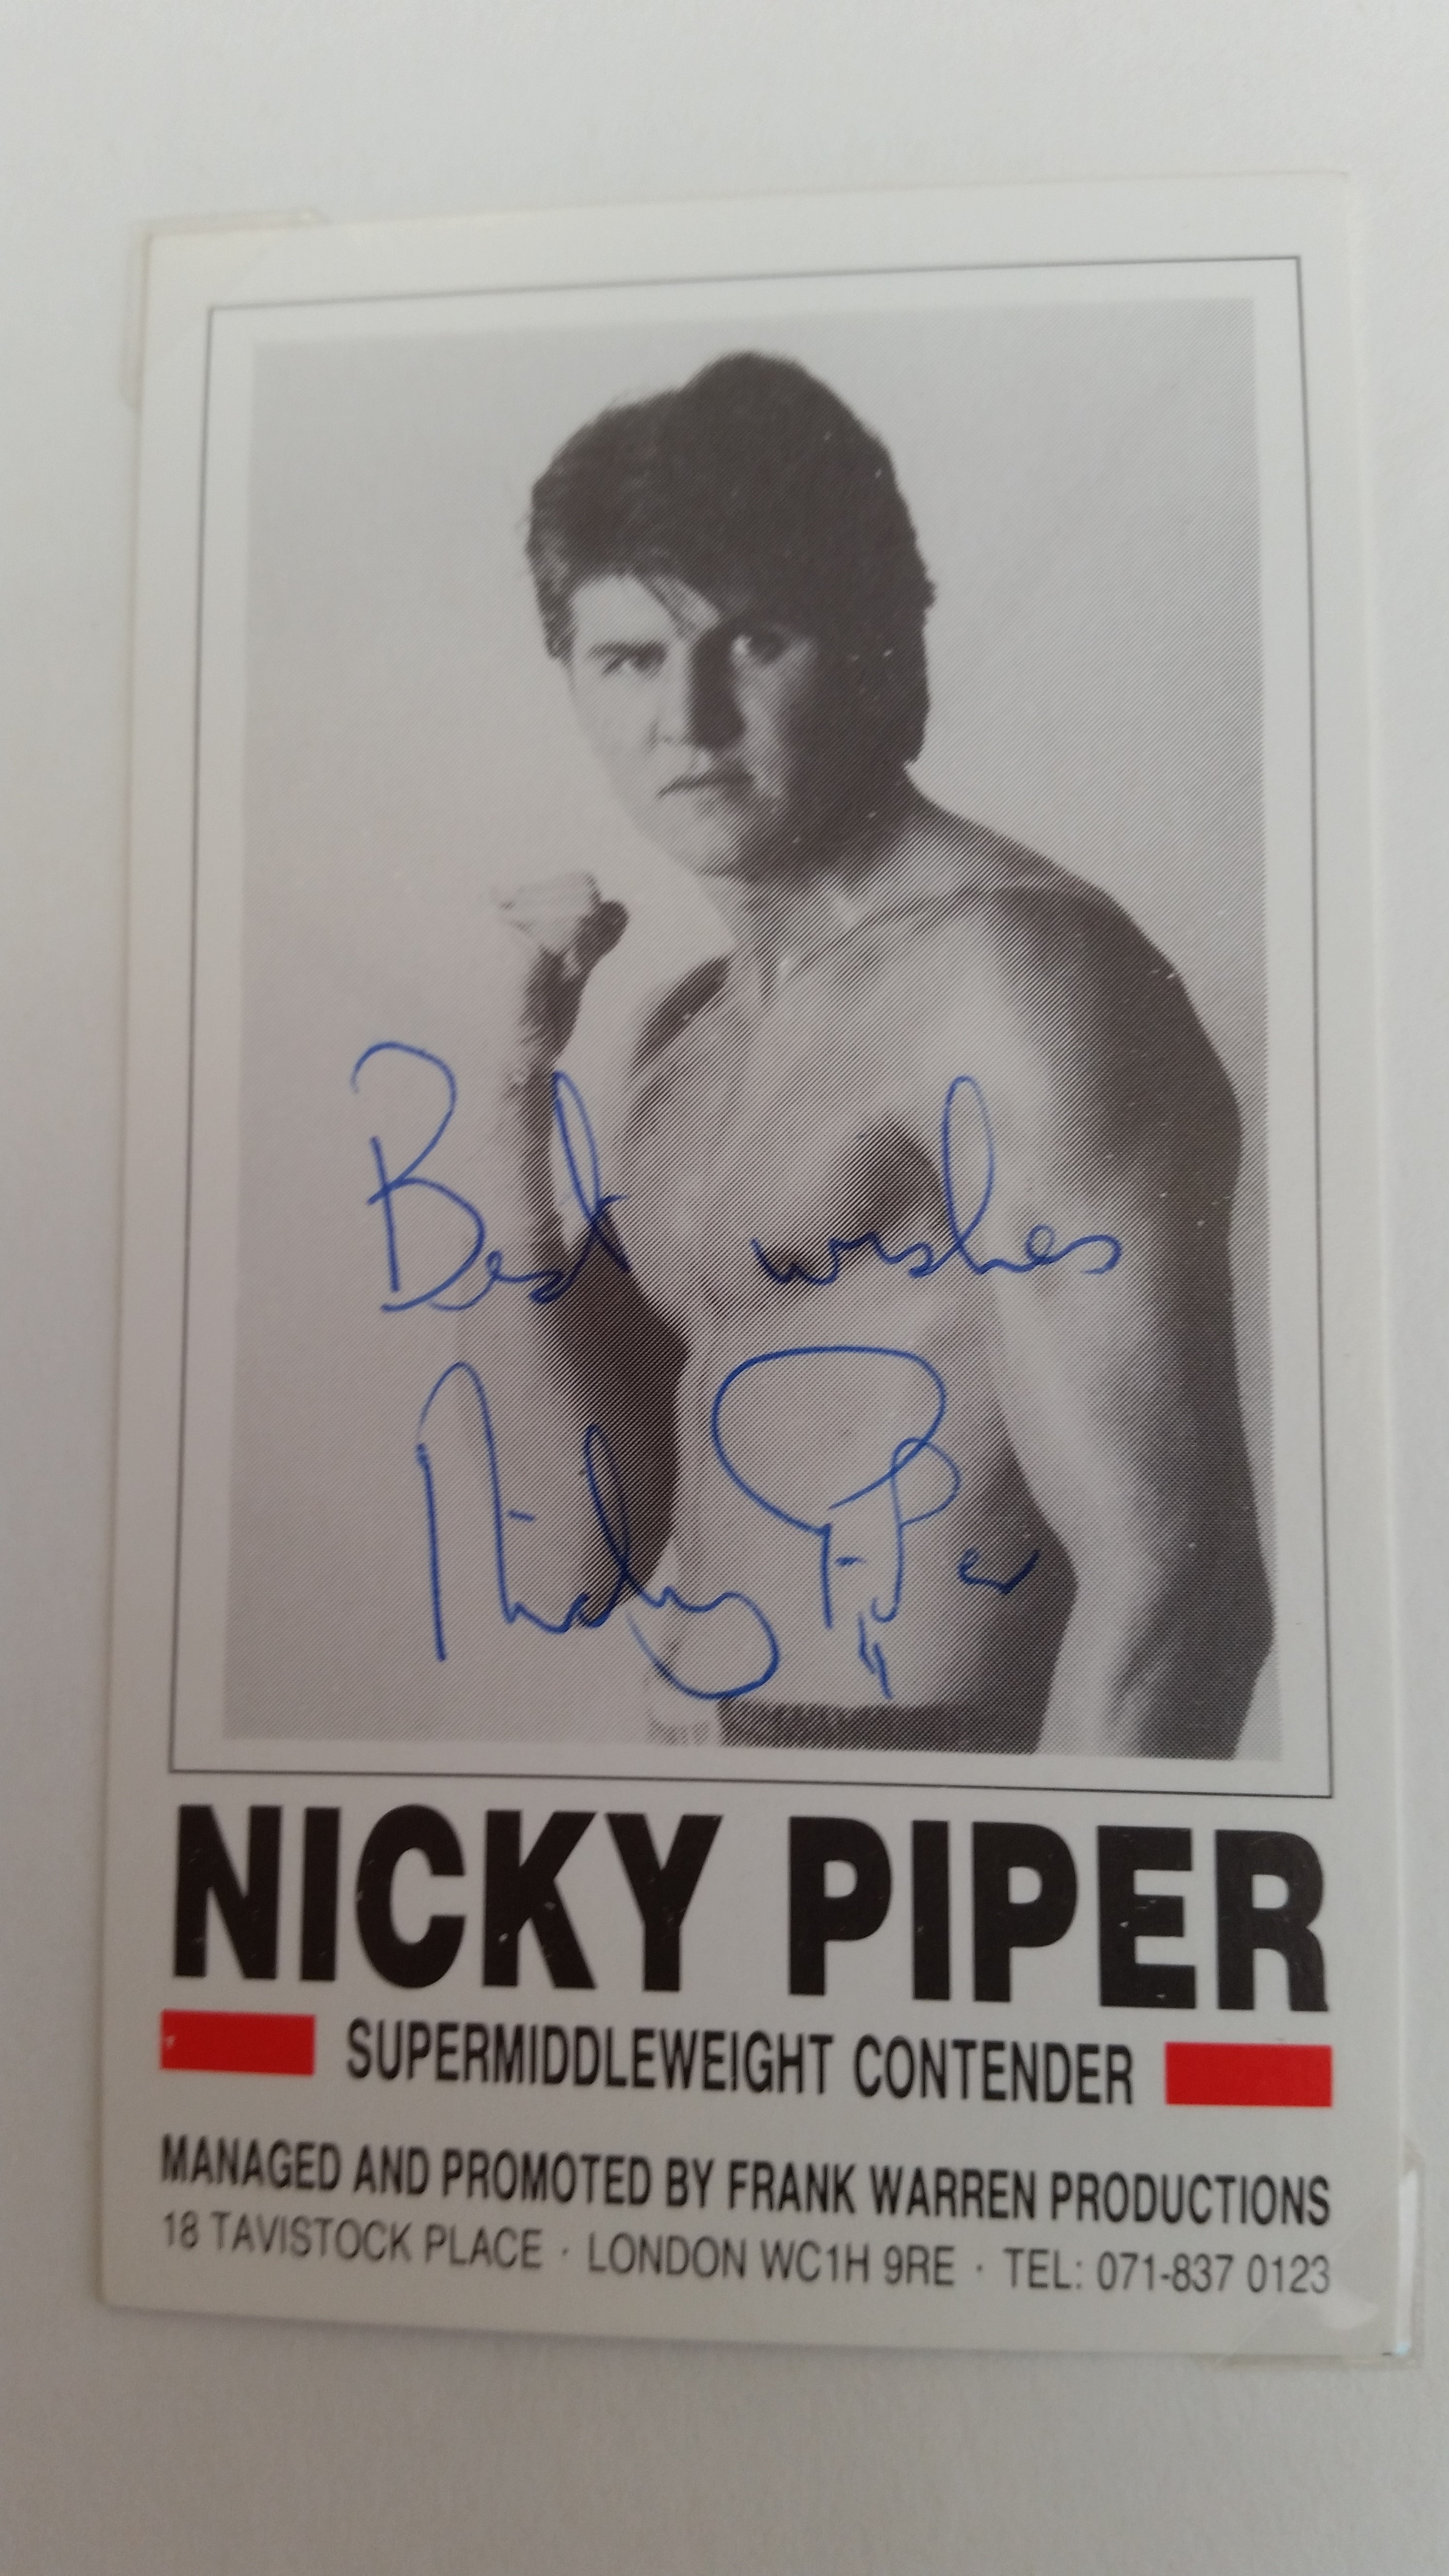 BOXING, signed promotional card by Nicky Piper, corner-mounted to card showing him half-length in